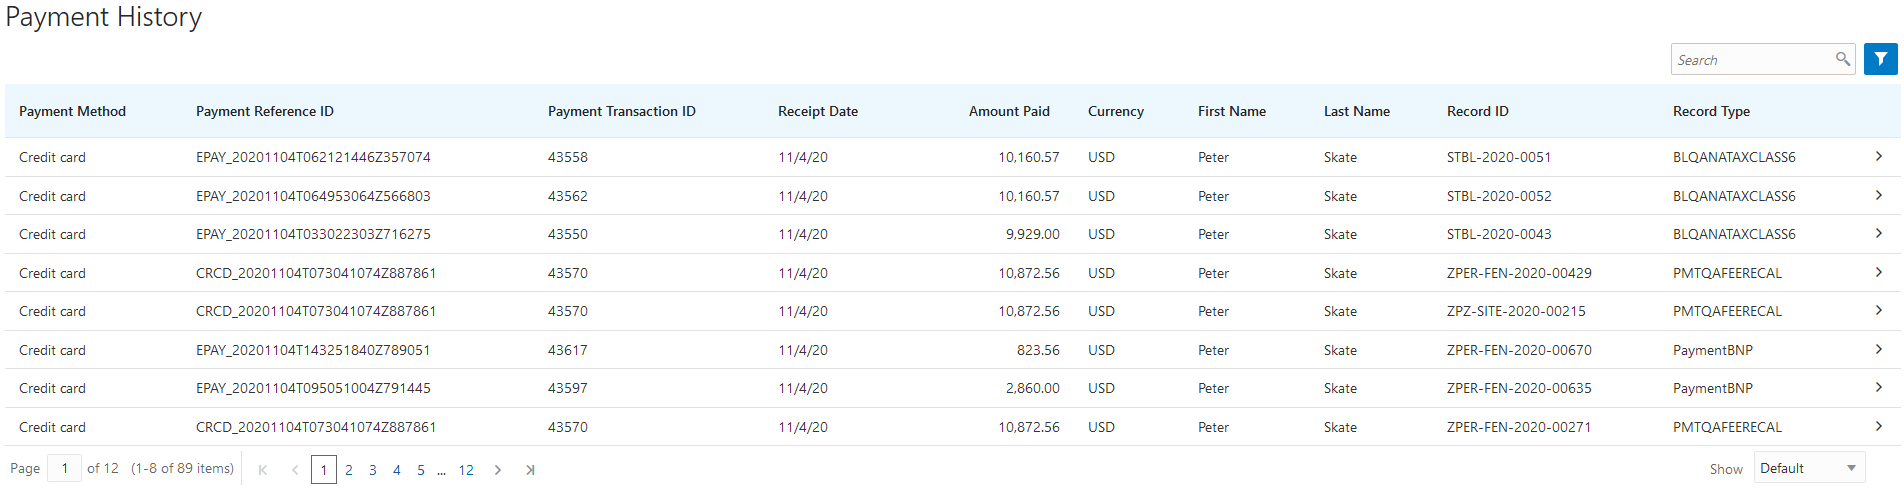 Example of the Payment History page